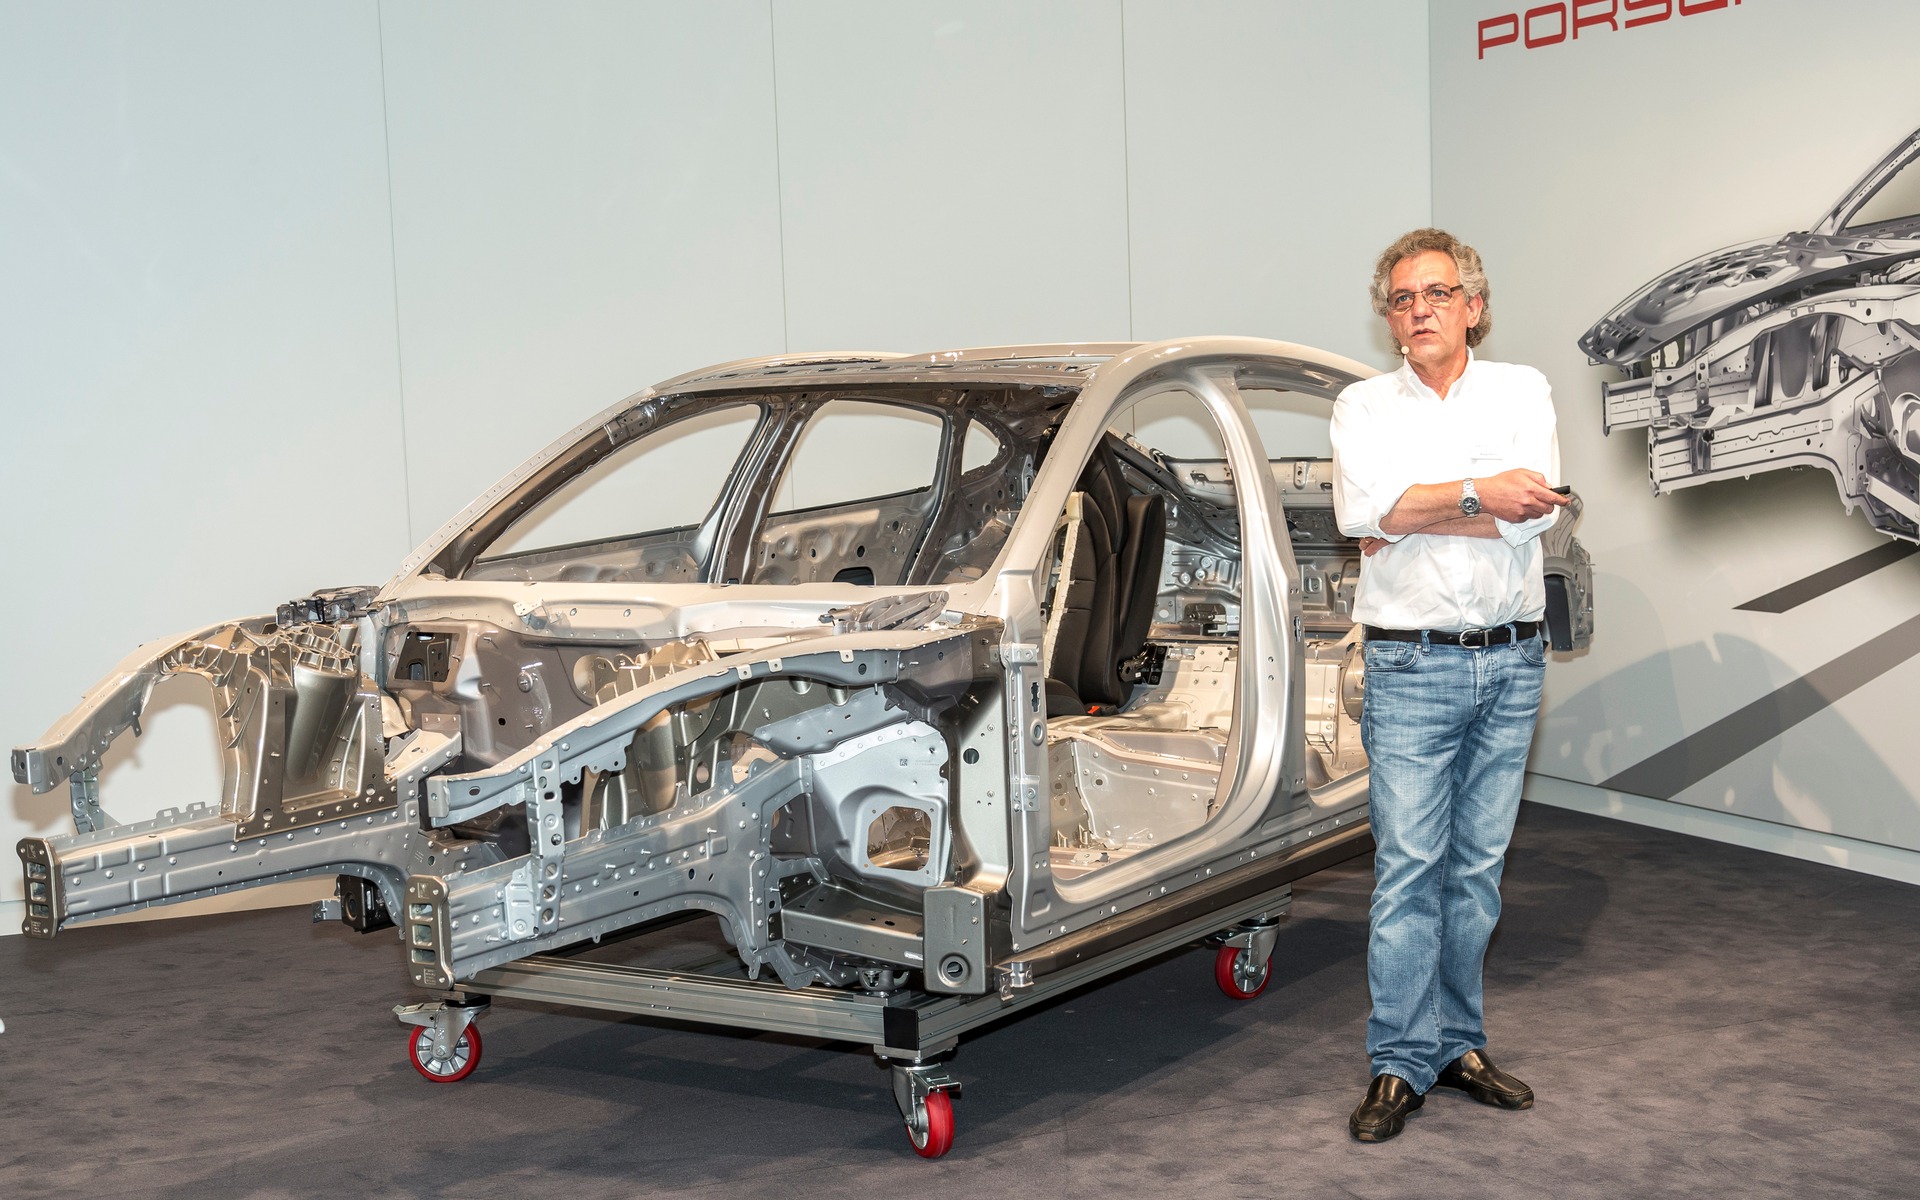 The 2017 Porsche Panamera's structure assembly process in detail